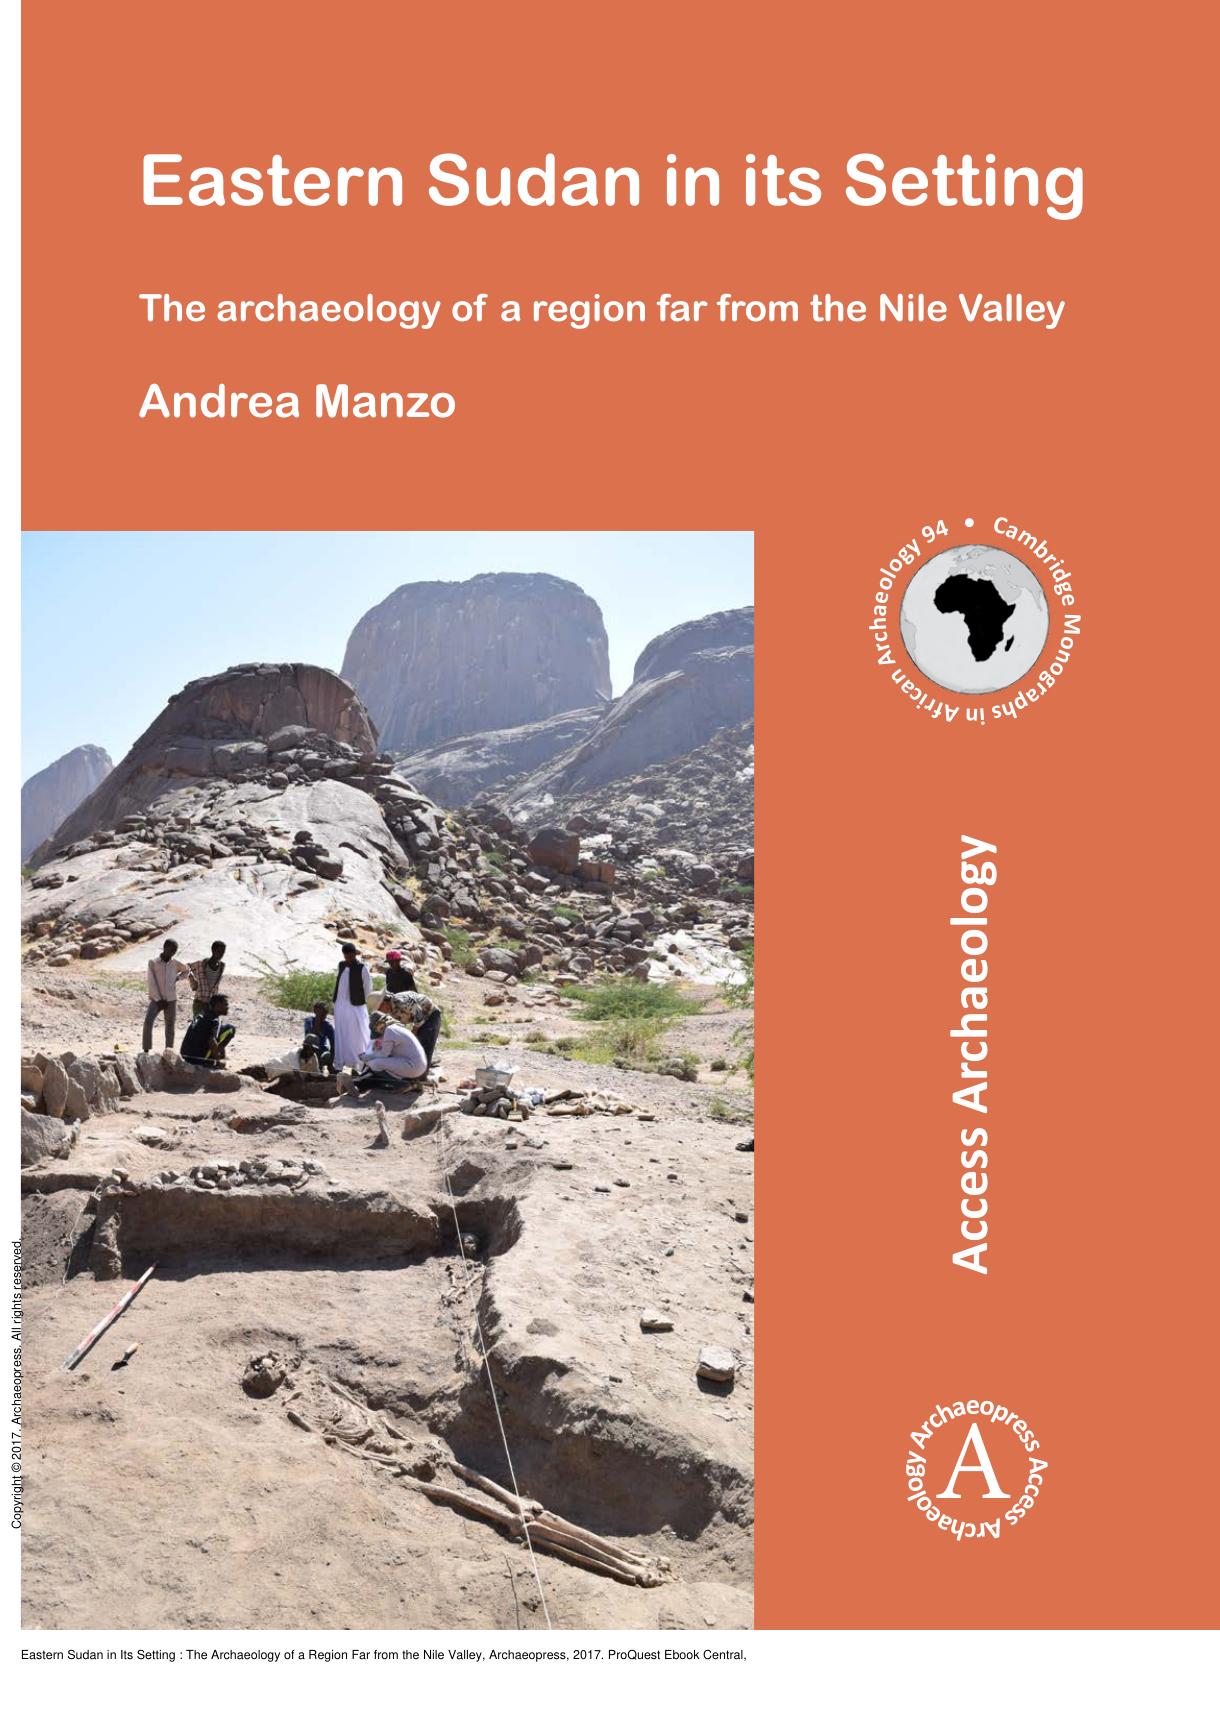 Eastern Sudan in Its Setting: The Archaeology of a Region Far from the Nile Valley by Andrea Manzo